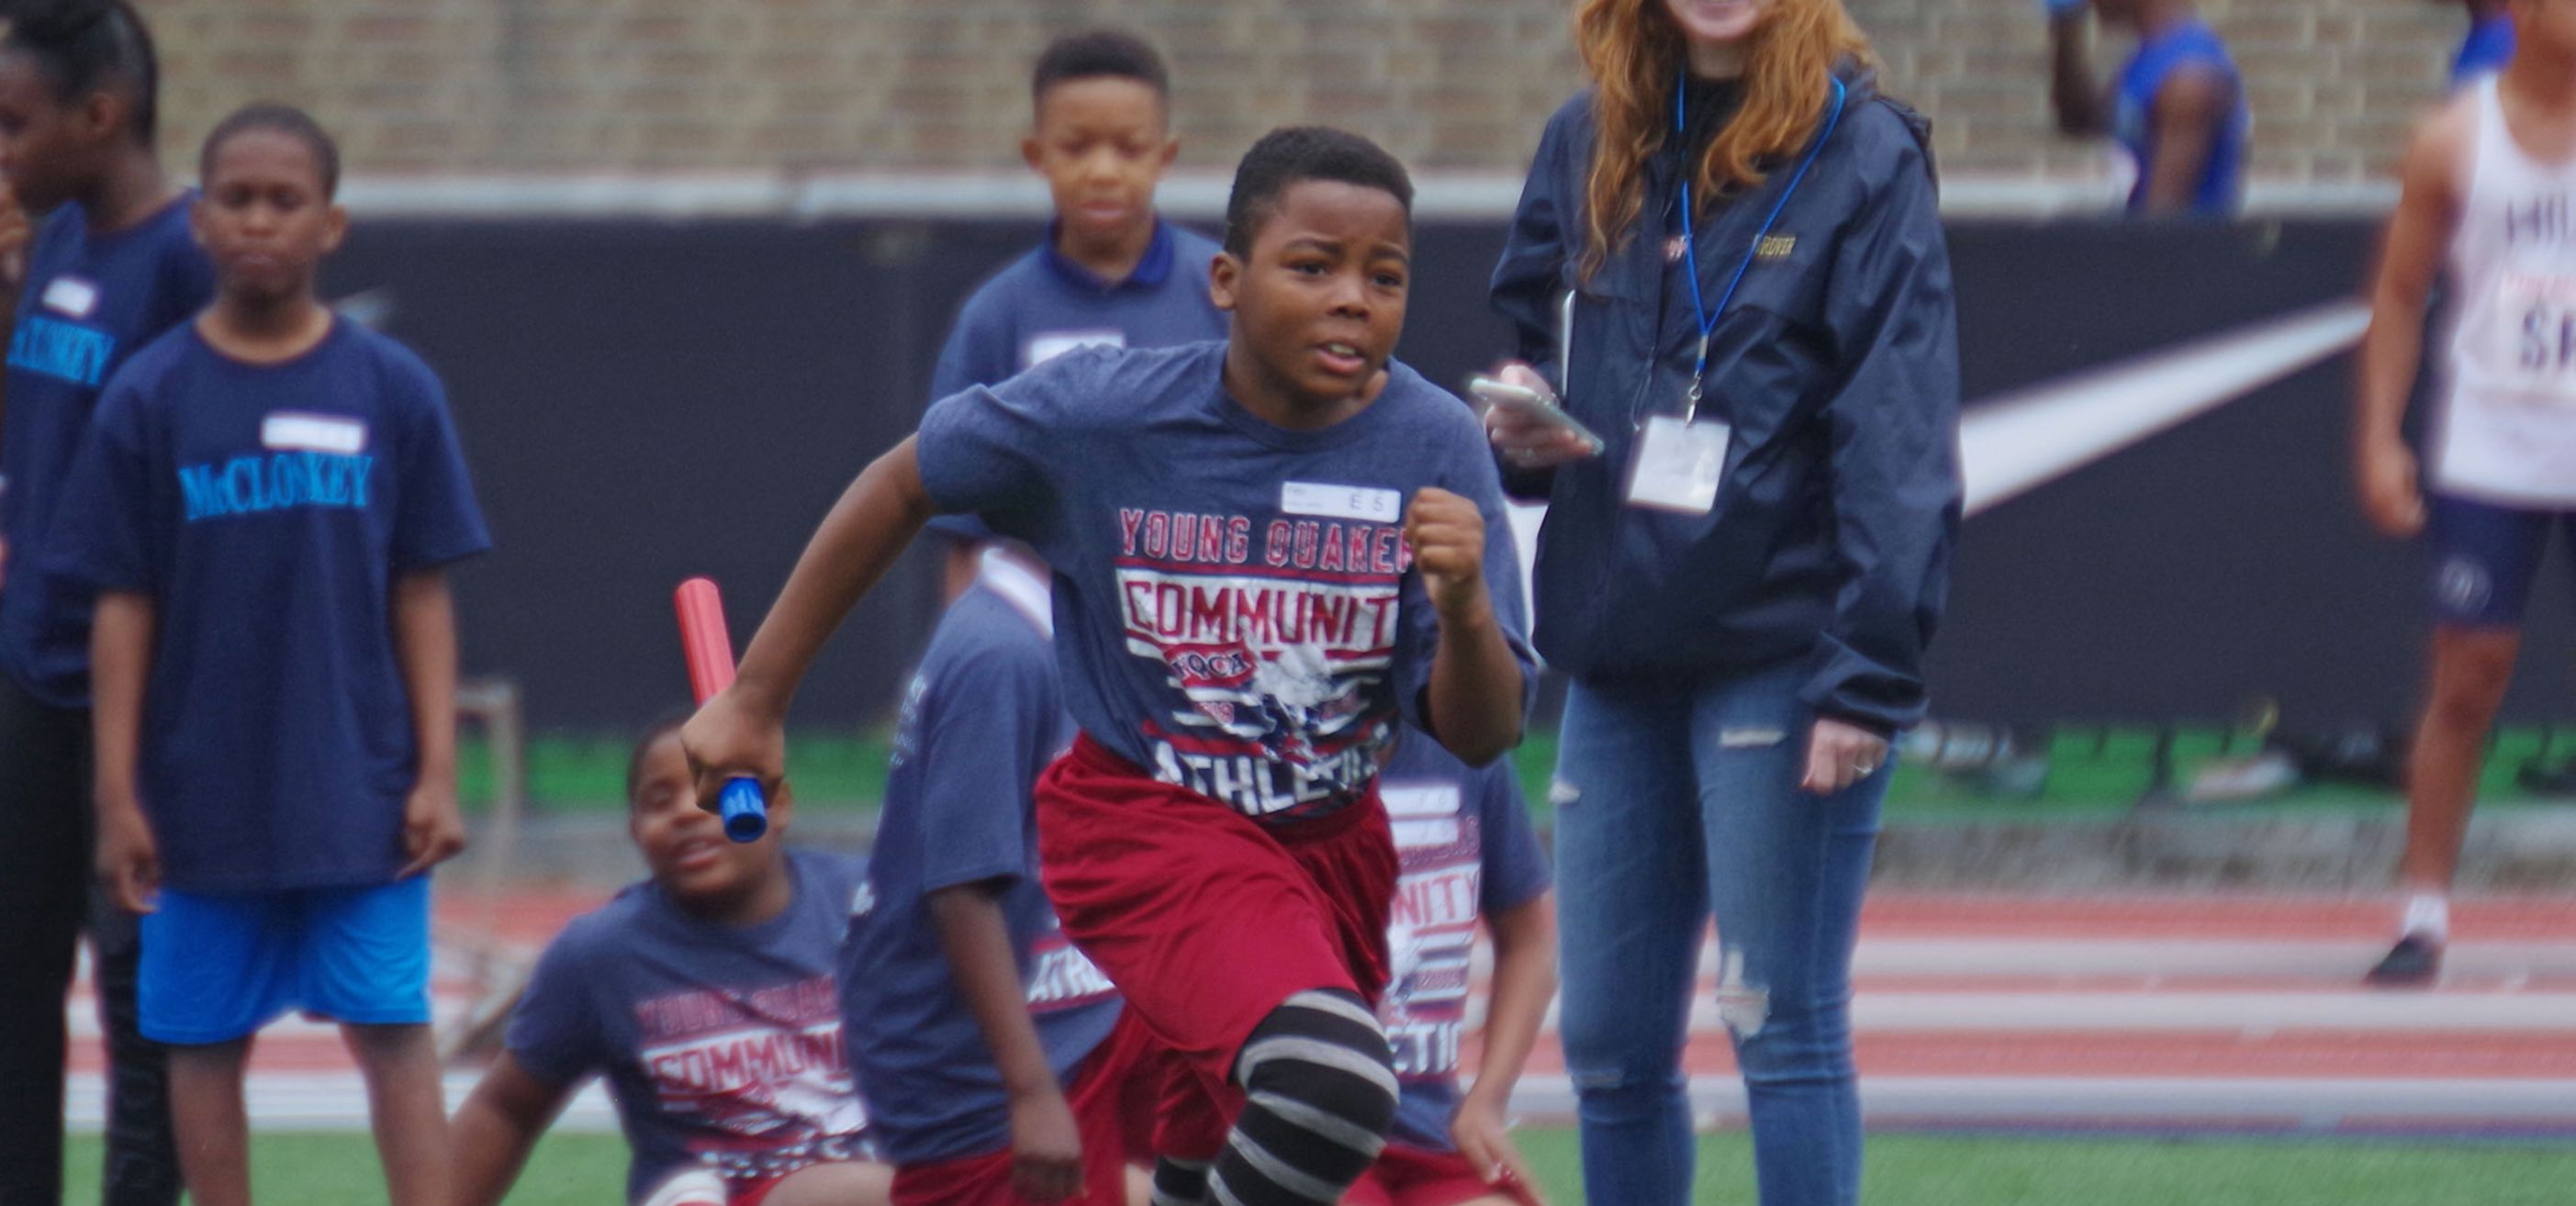 A student from West Philadelphia runs with a patron during a Young Quakers track & field event at Franklin Field.